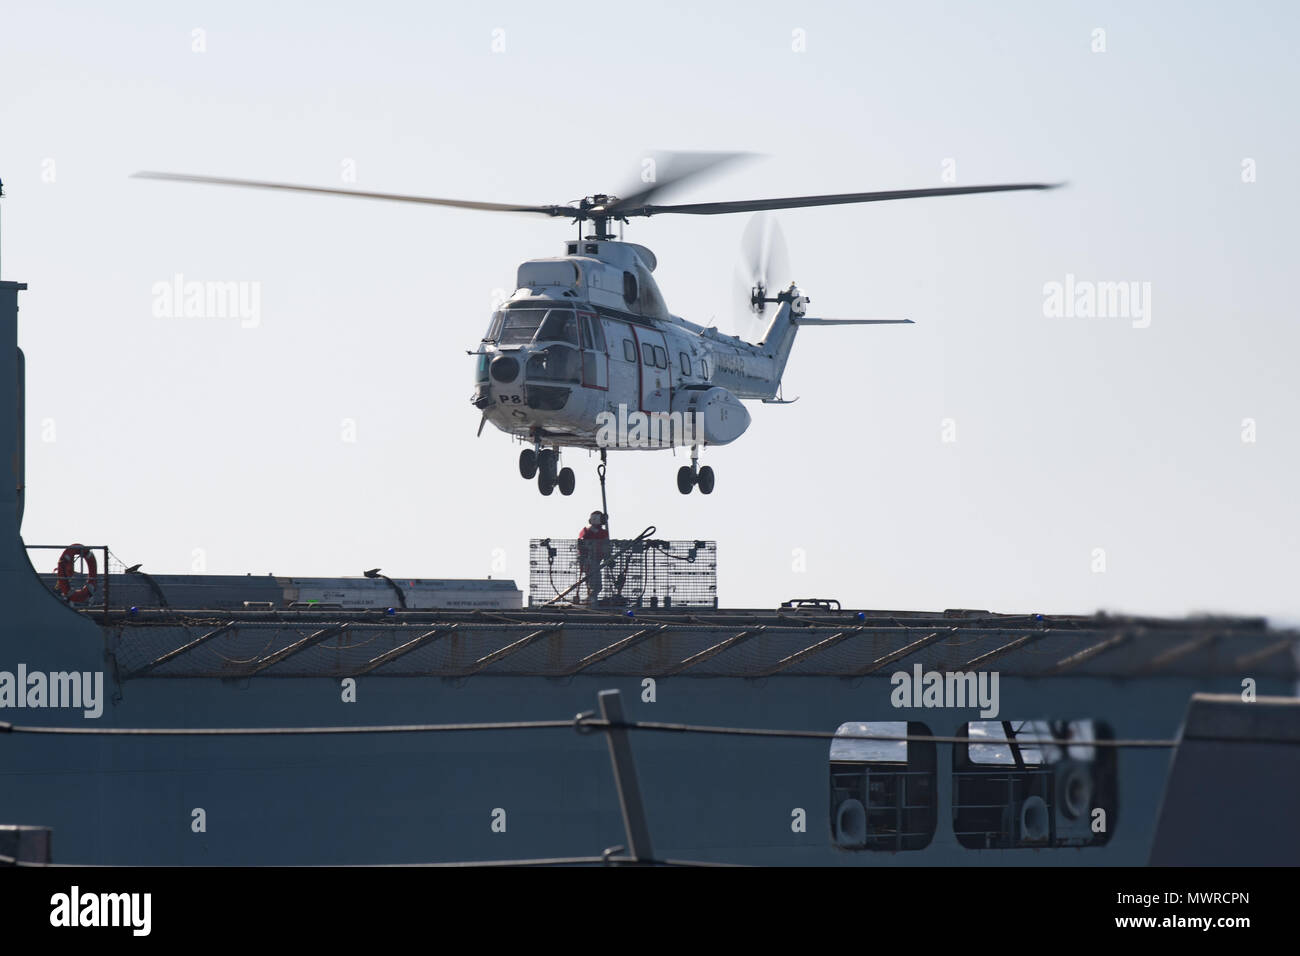 180516-N-AV754-0090 U.S. 5TH FLEET AREA OF OPERATIONS (May 16, 2018) A Eurocopter AS332 Super Puma helicopter picks up cargo from the dry cargo and ammunition ship USNS Amelia Earhart (T-AKE 6) during a replenishment-at-sea with the Arleigh Burke-class guided-missile destroyer USS Winston S. Churchill (DDG 81). Winston S. Churchill is deployed to the U.S. 5th Fleet area of operations in support of maritime security operations to reassure allies and partners and preserve the freedom of navigation and the free flow of commerce in the region. (U.S. Navy photo by Mass Communication Specialist 3rd  Stock Photo